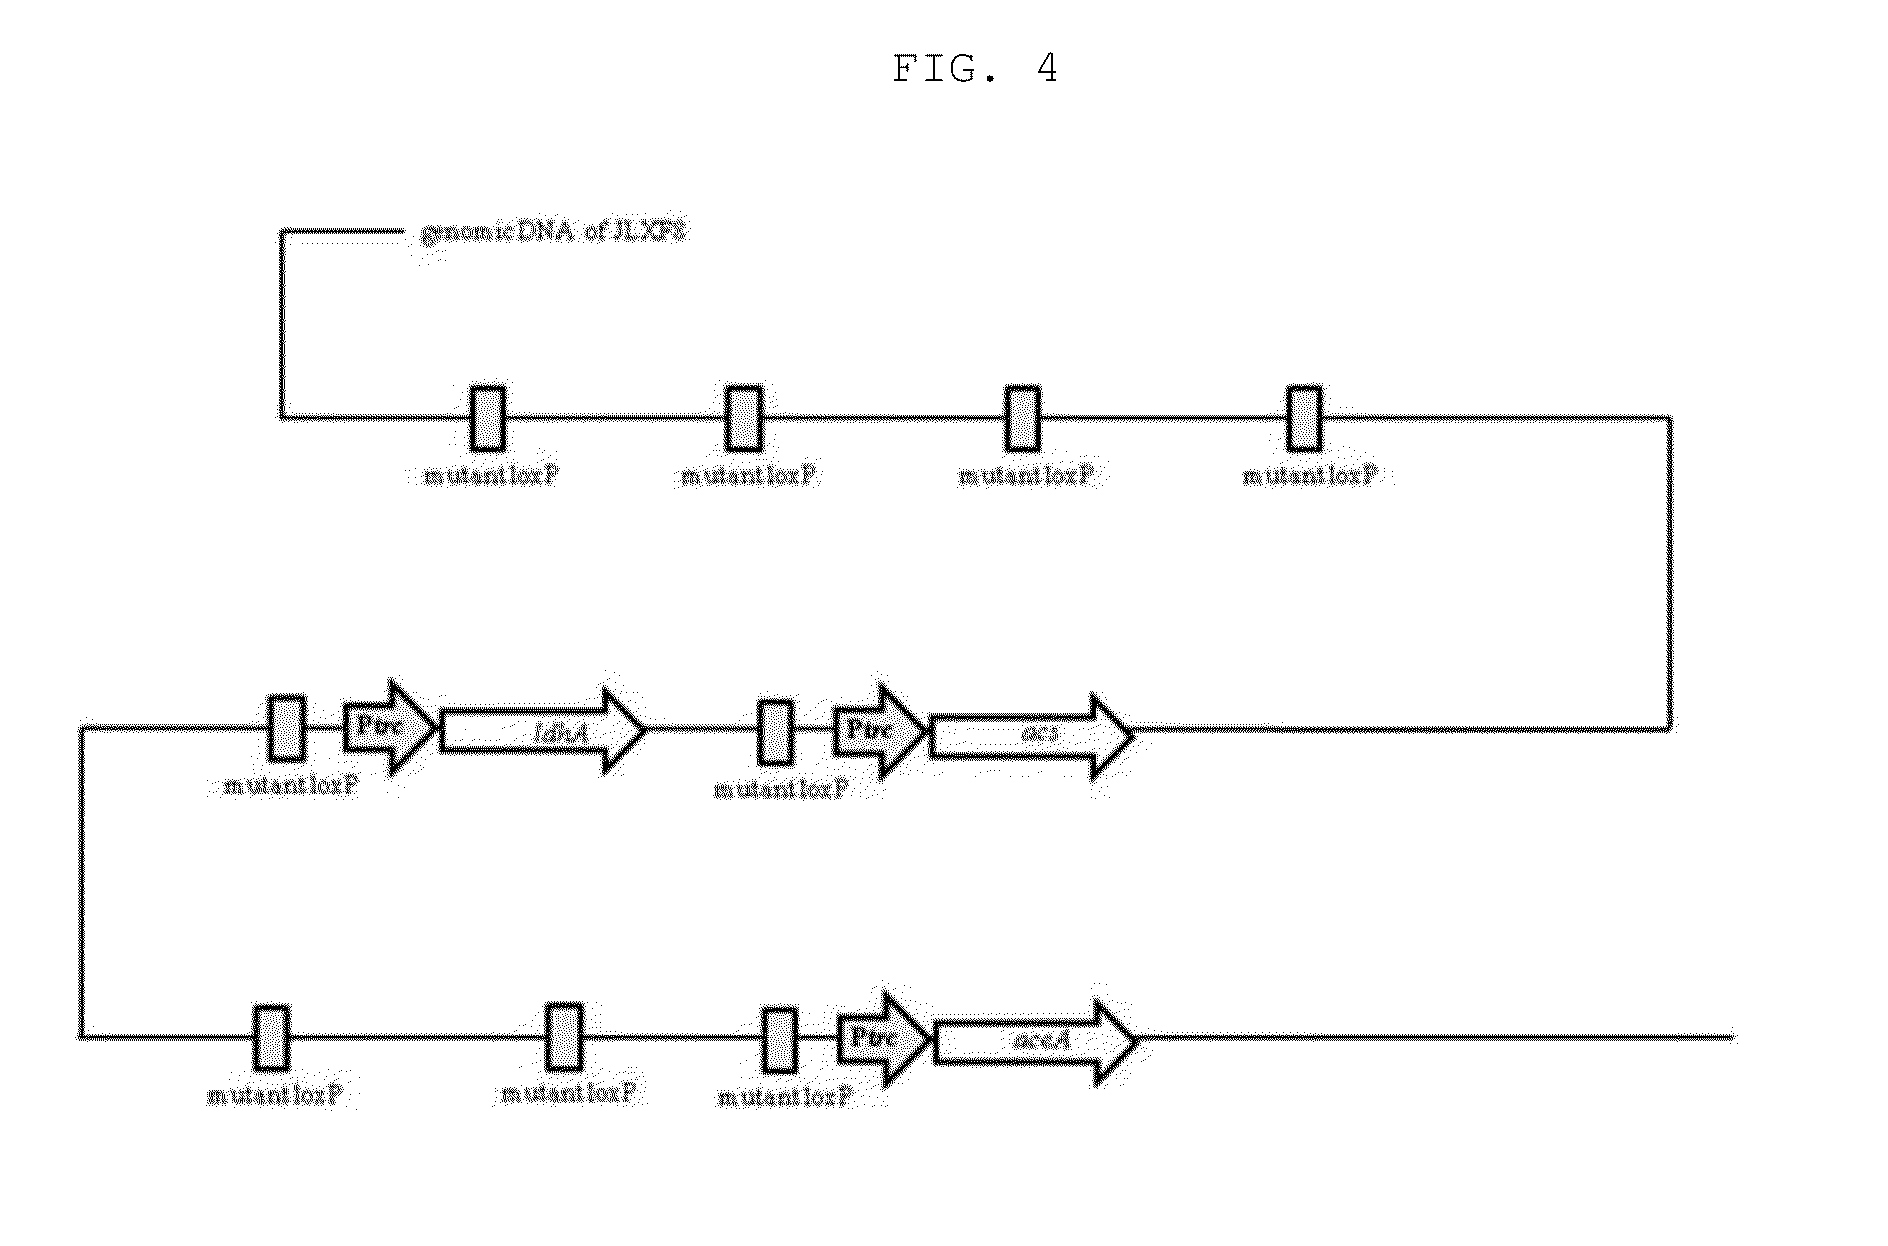 Recombinant microorganism having ability to produce [lactate-co-glycolate] copolymer from glucose, and method for preparing [lactate-co-glycolate] copolymer using same